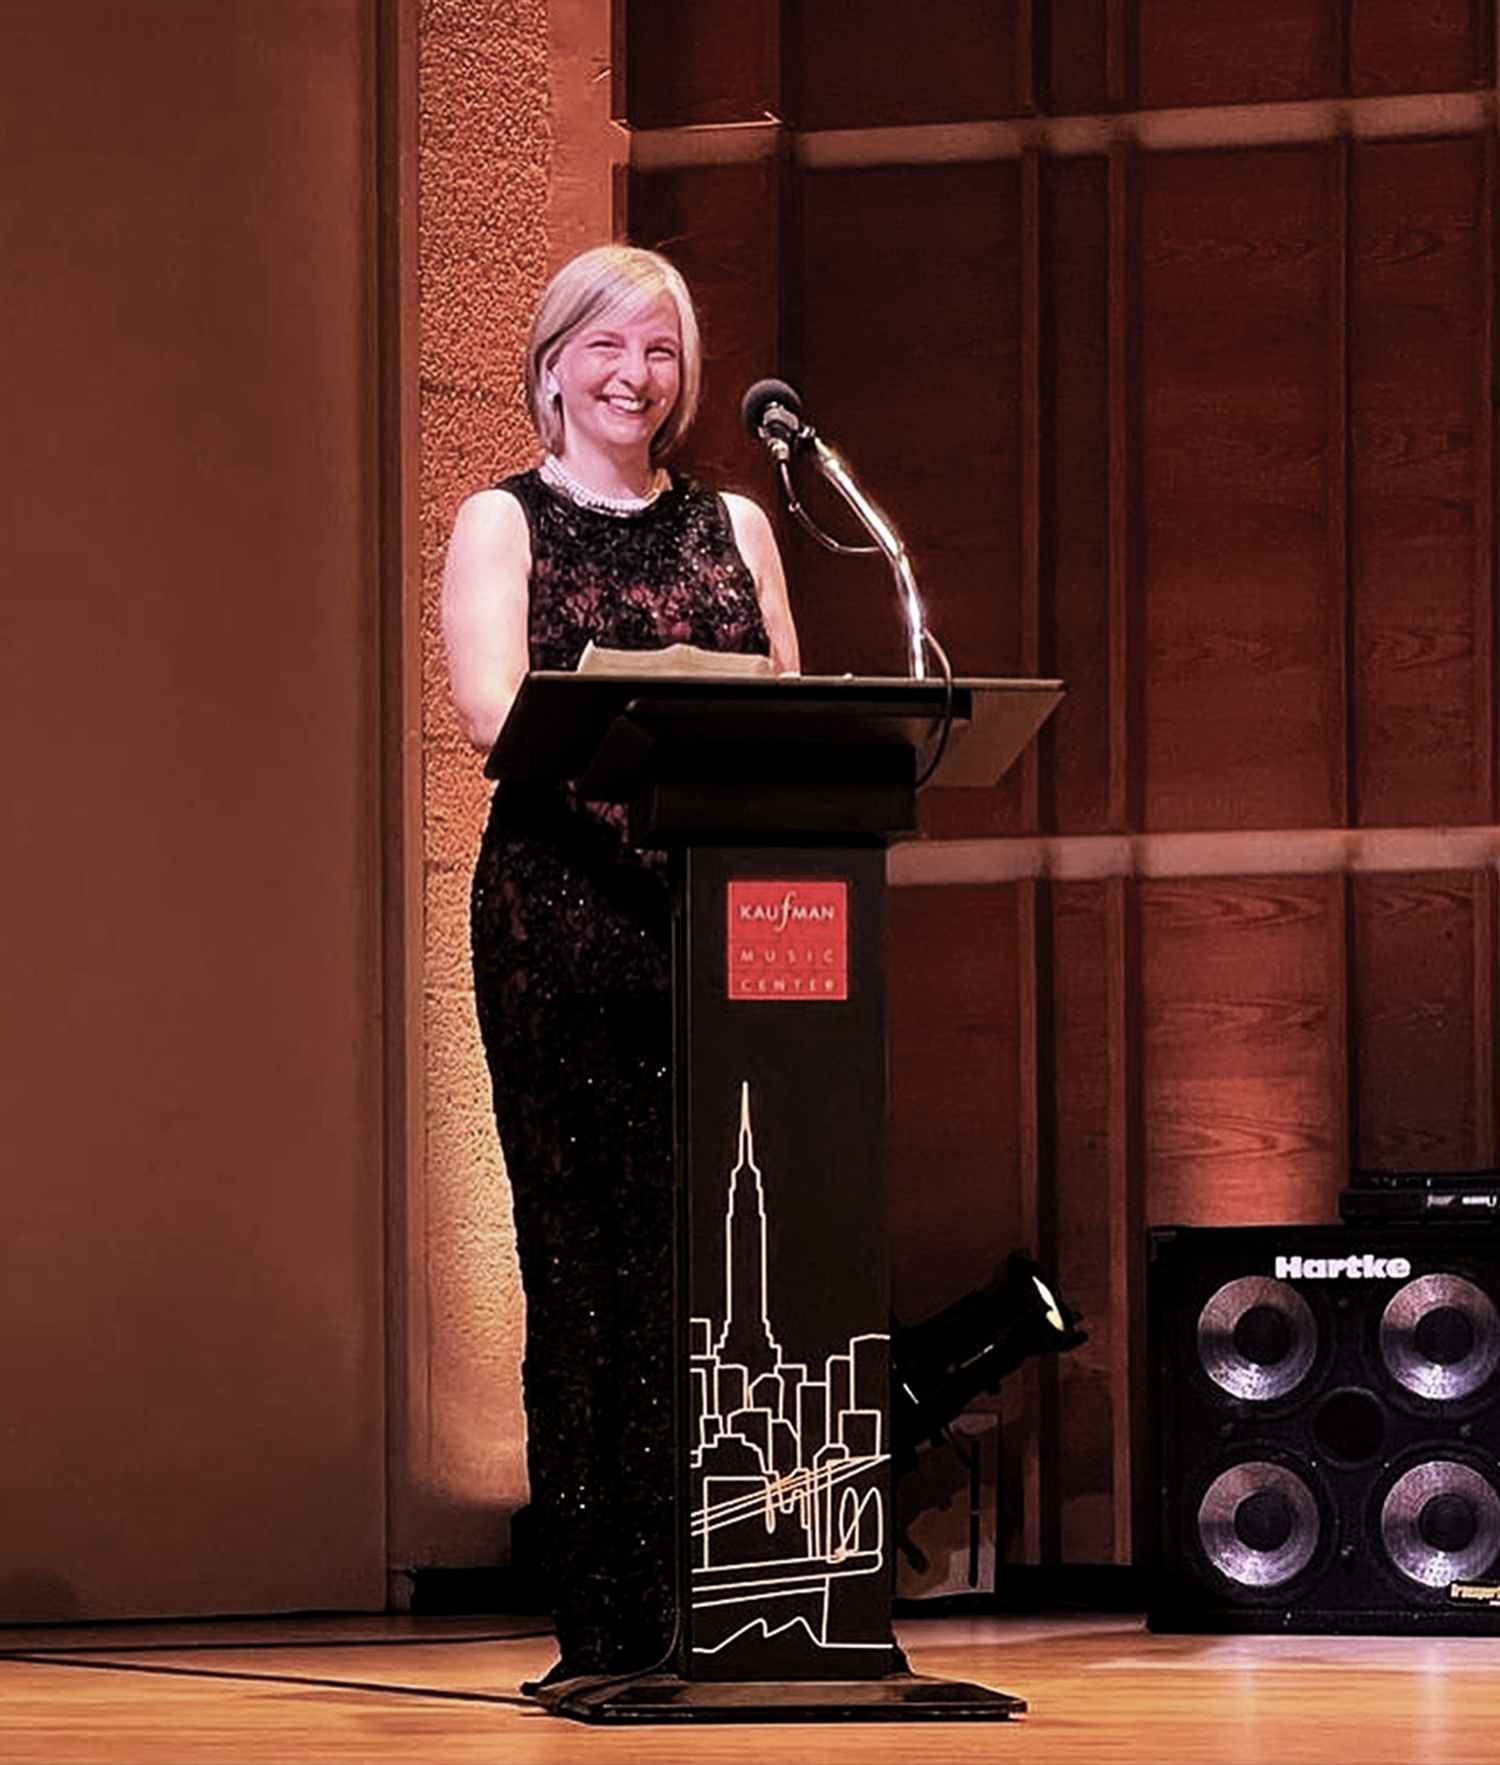 Orli Shaham is board chair of the Kaufman Music Center in New York City